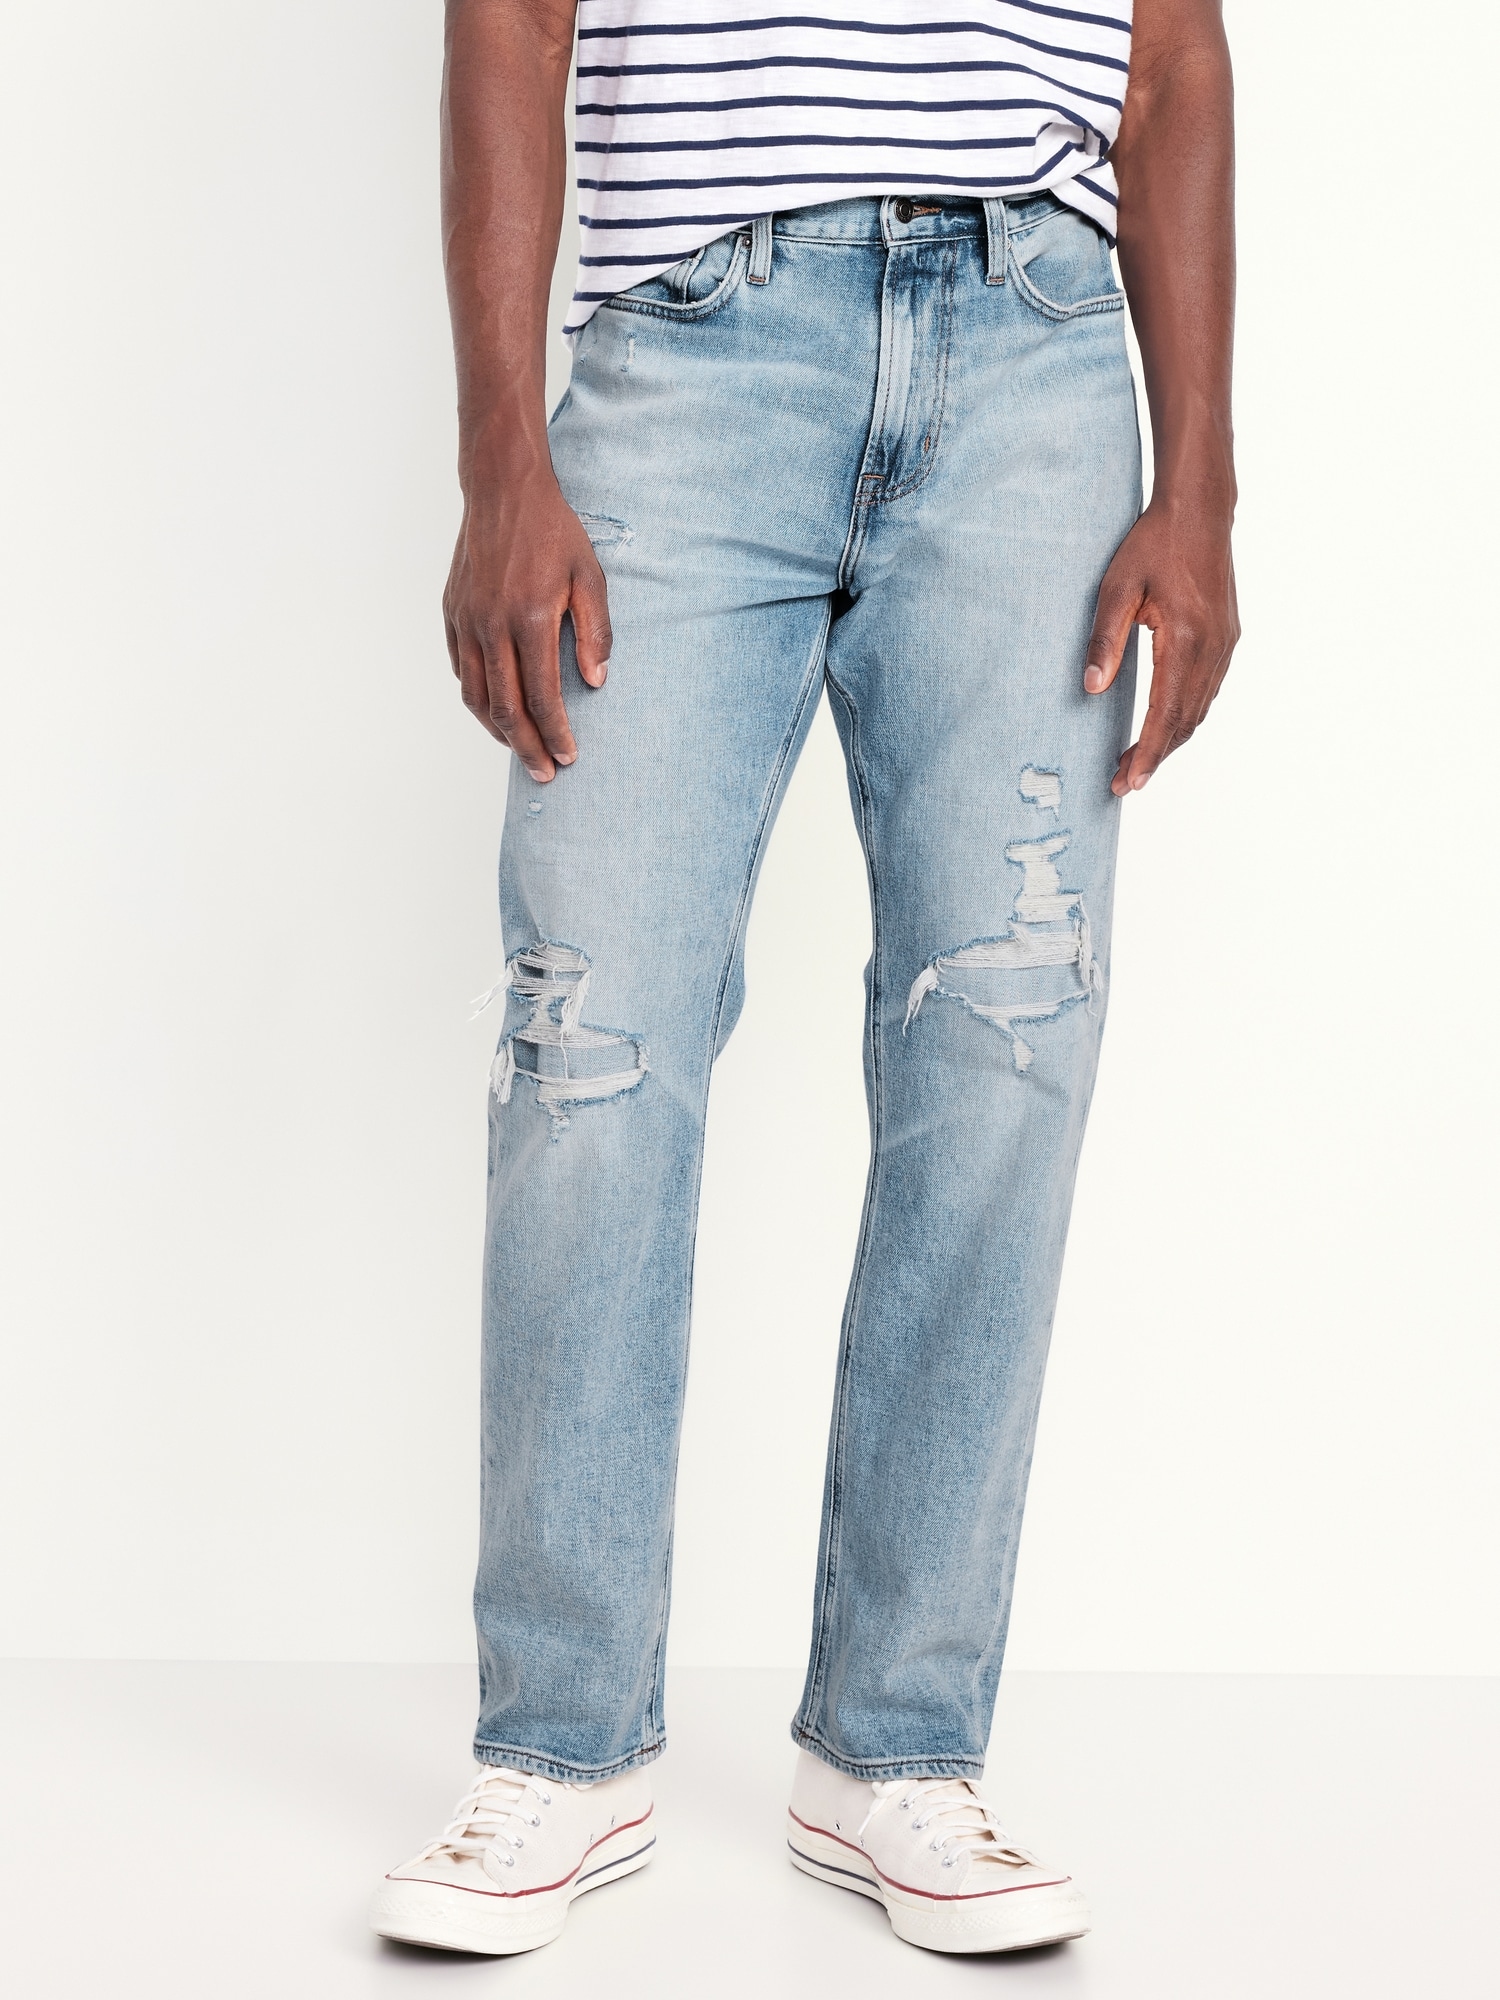 90s Straight Built-In Flex Jeans